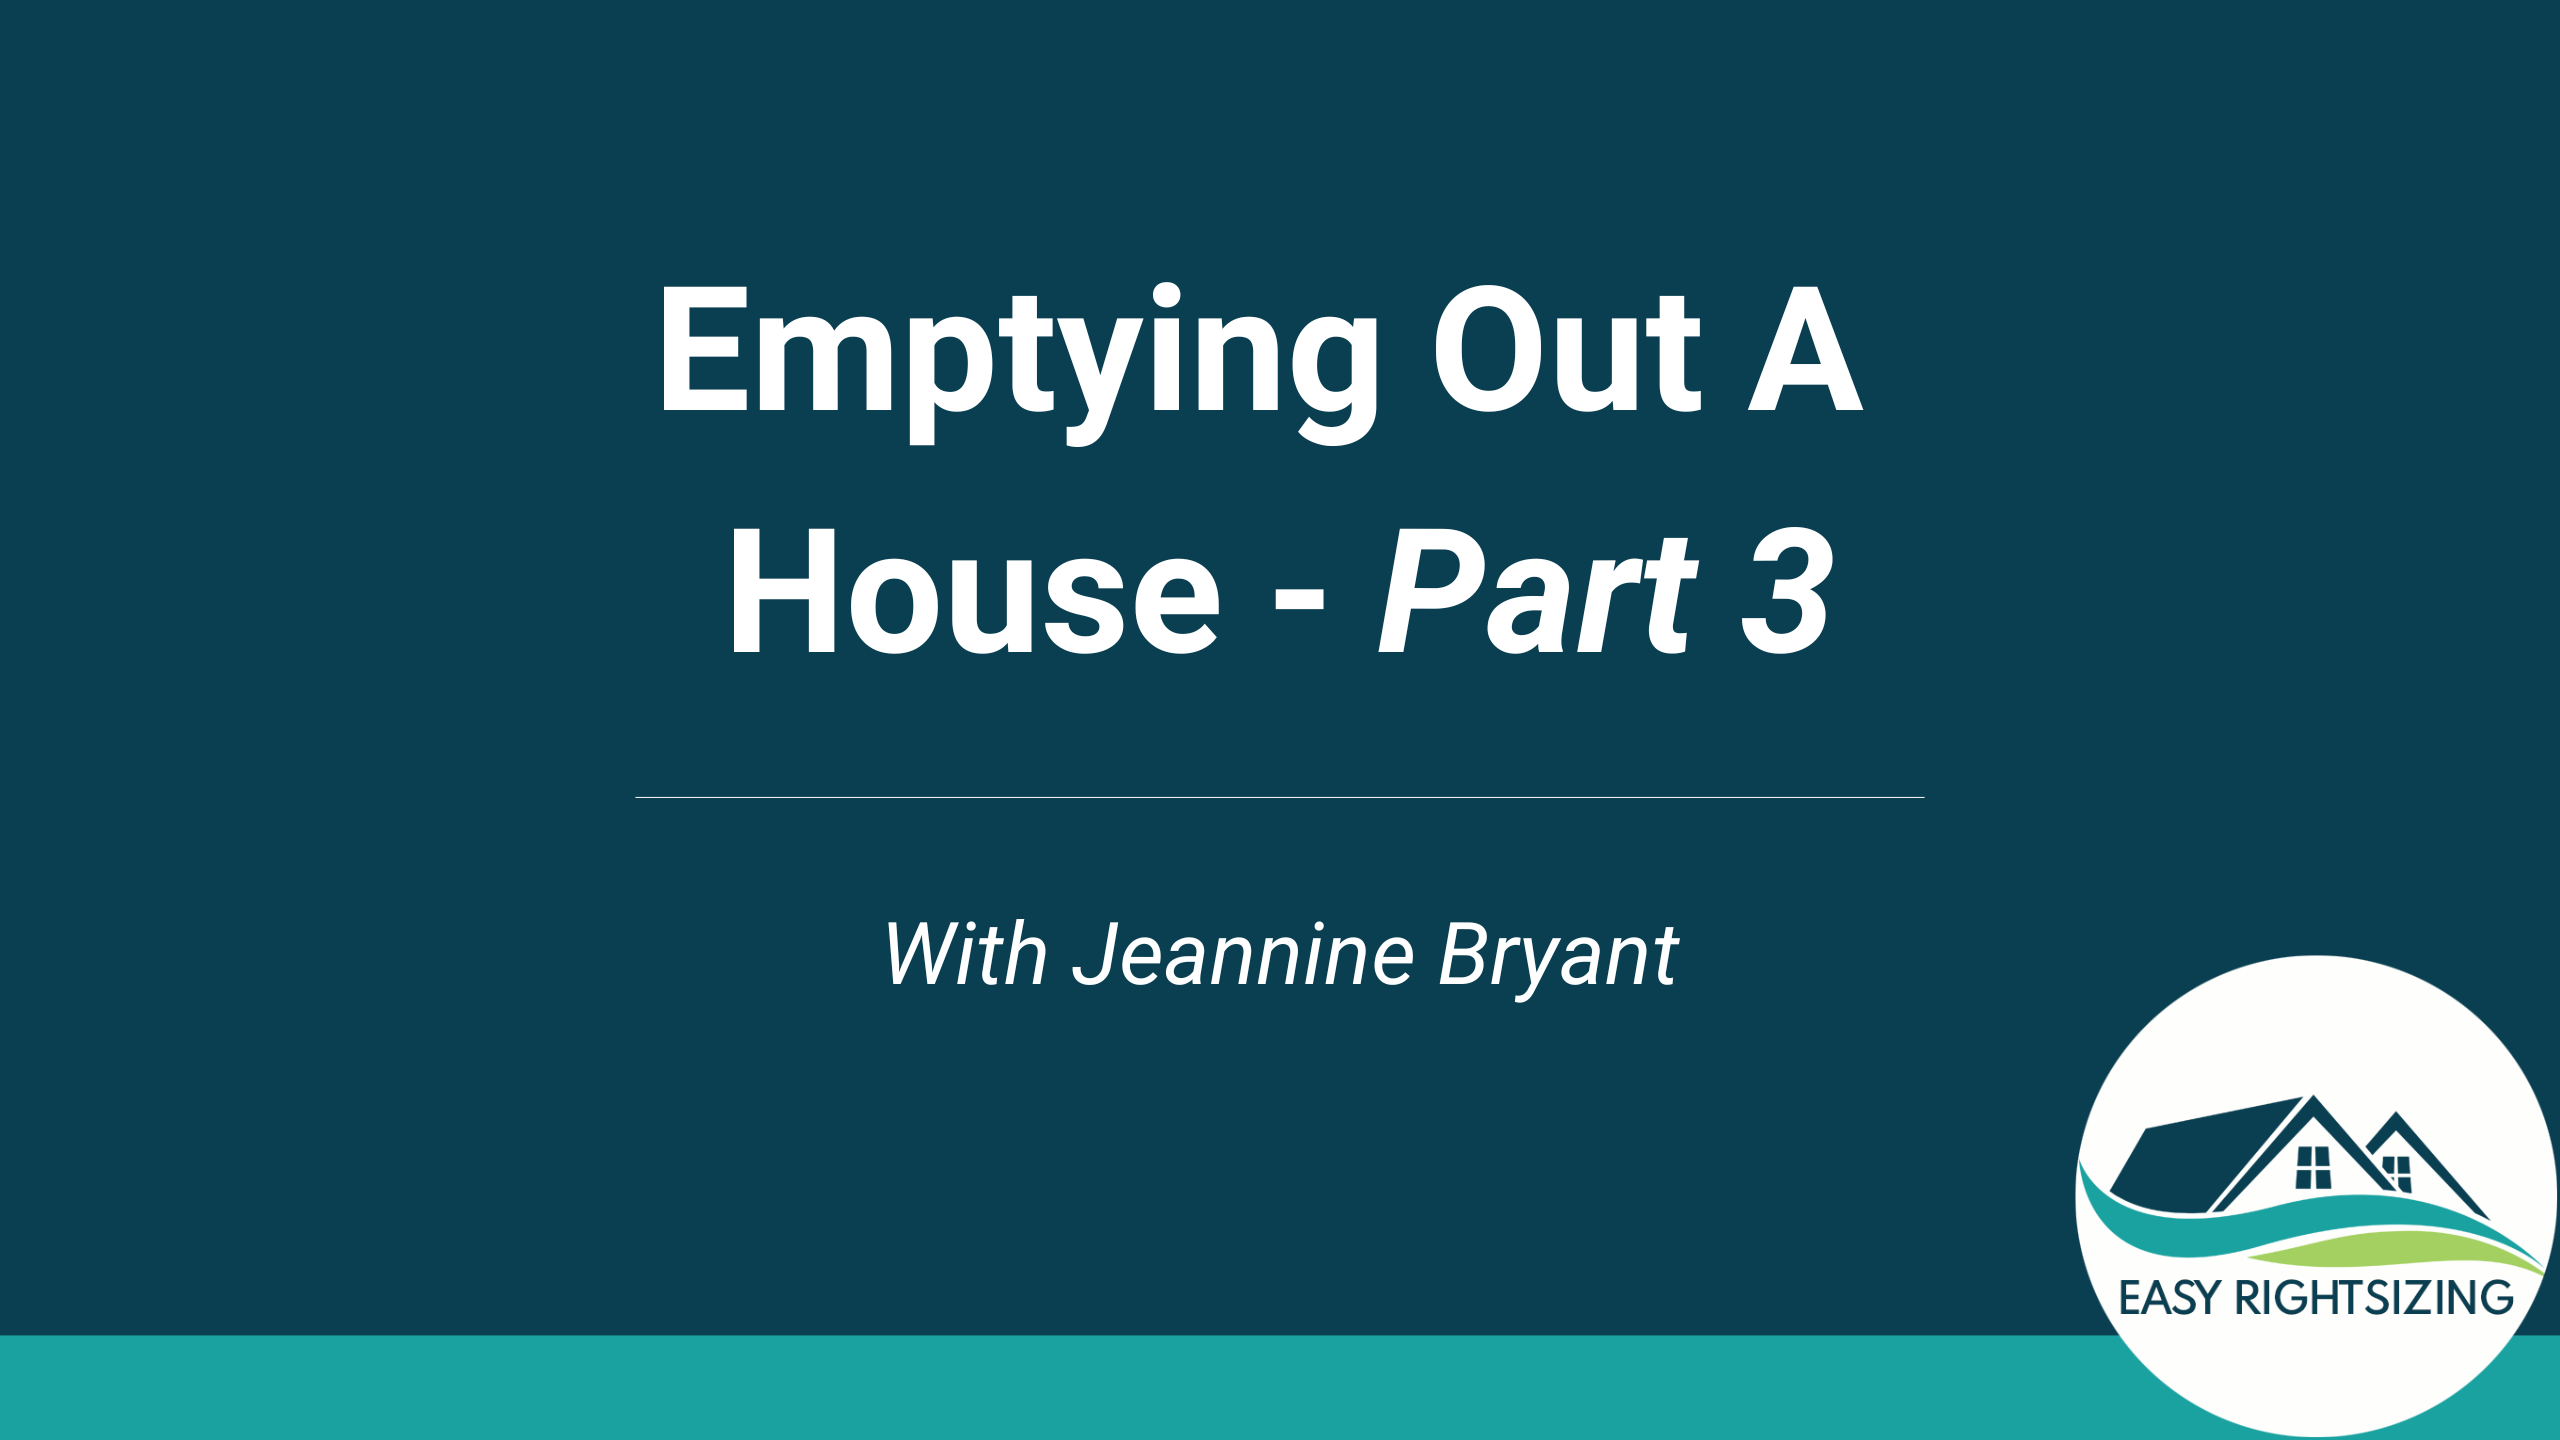 Emptying Out A House - Part 3